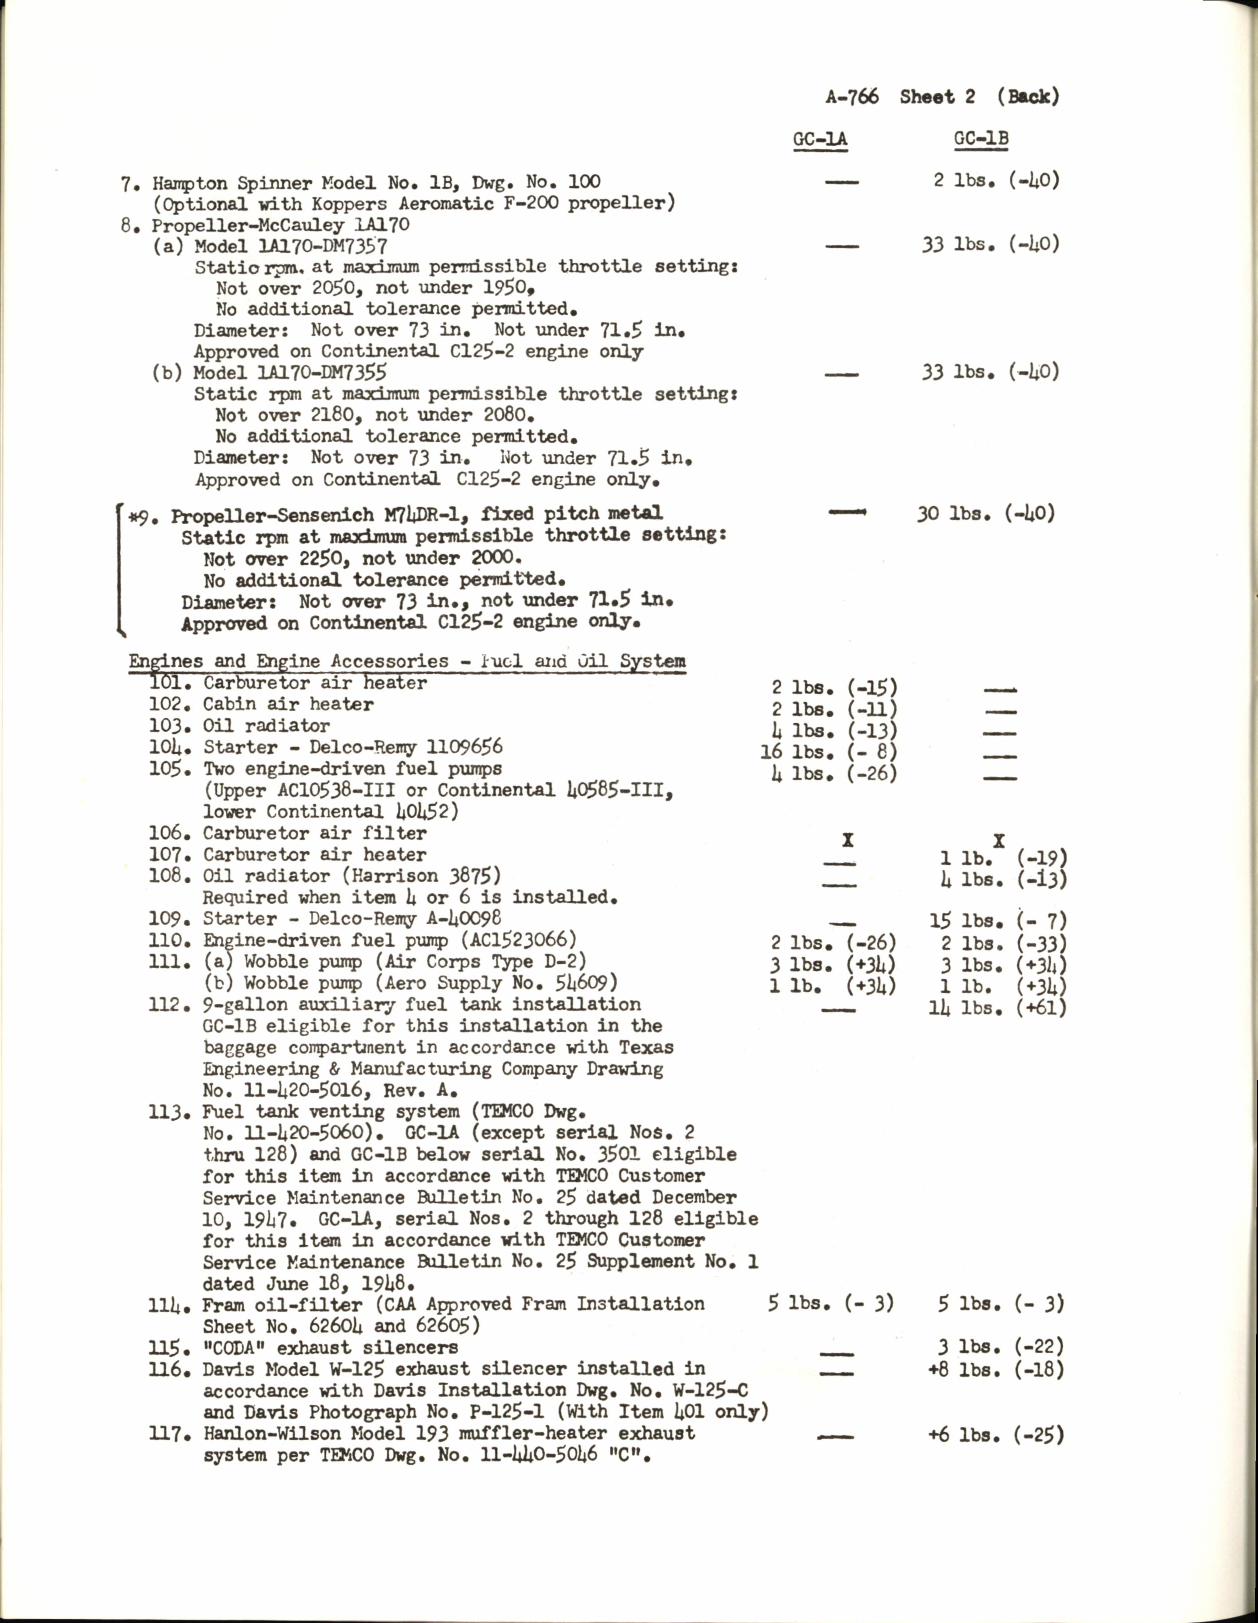 Sample page 6 from AirCorps Library document: Swift Specifications, A.D. Notes, and S.T.C.'s